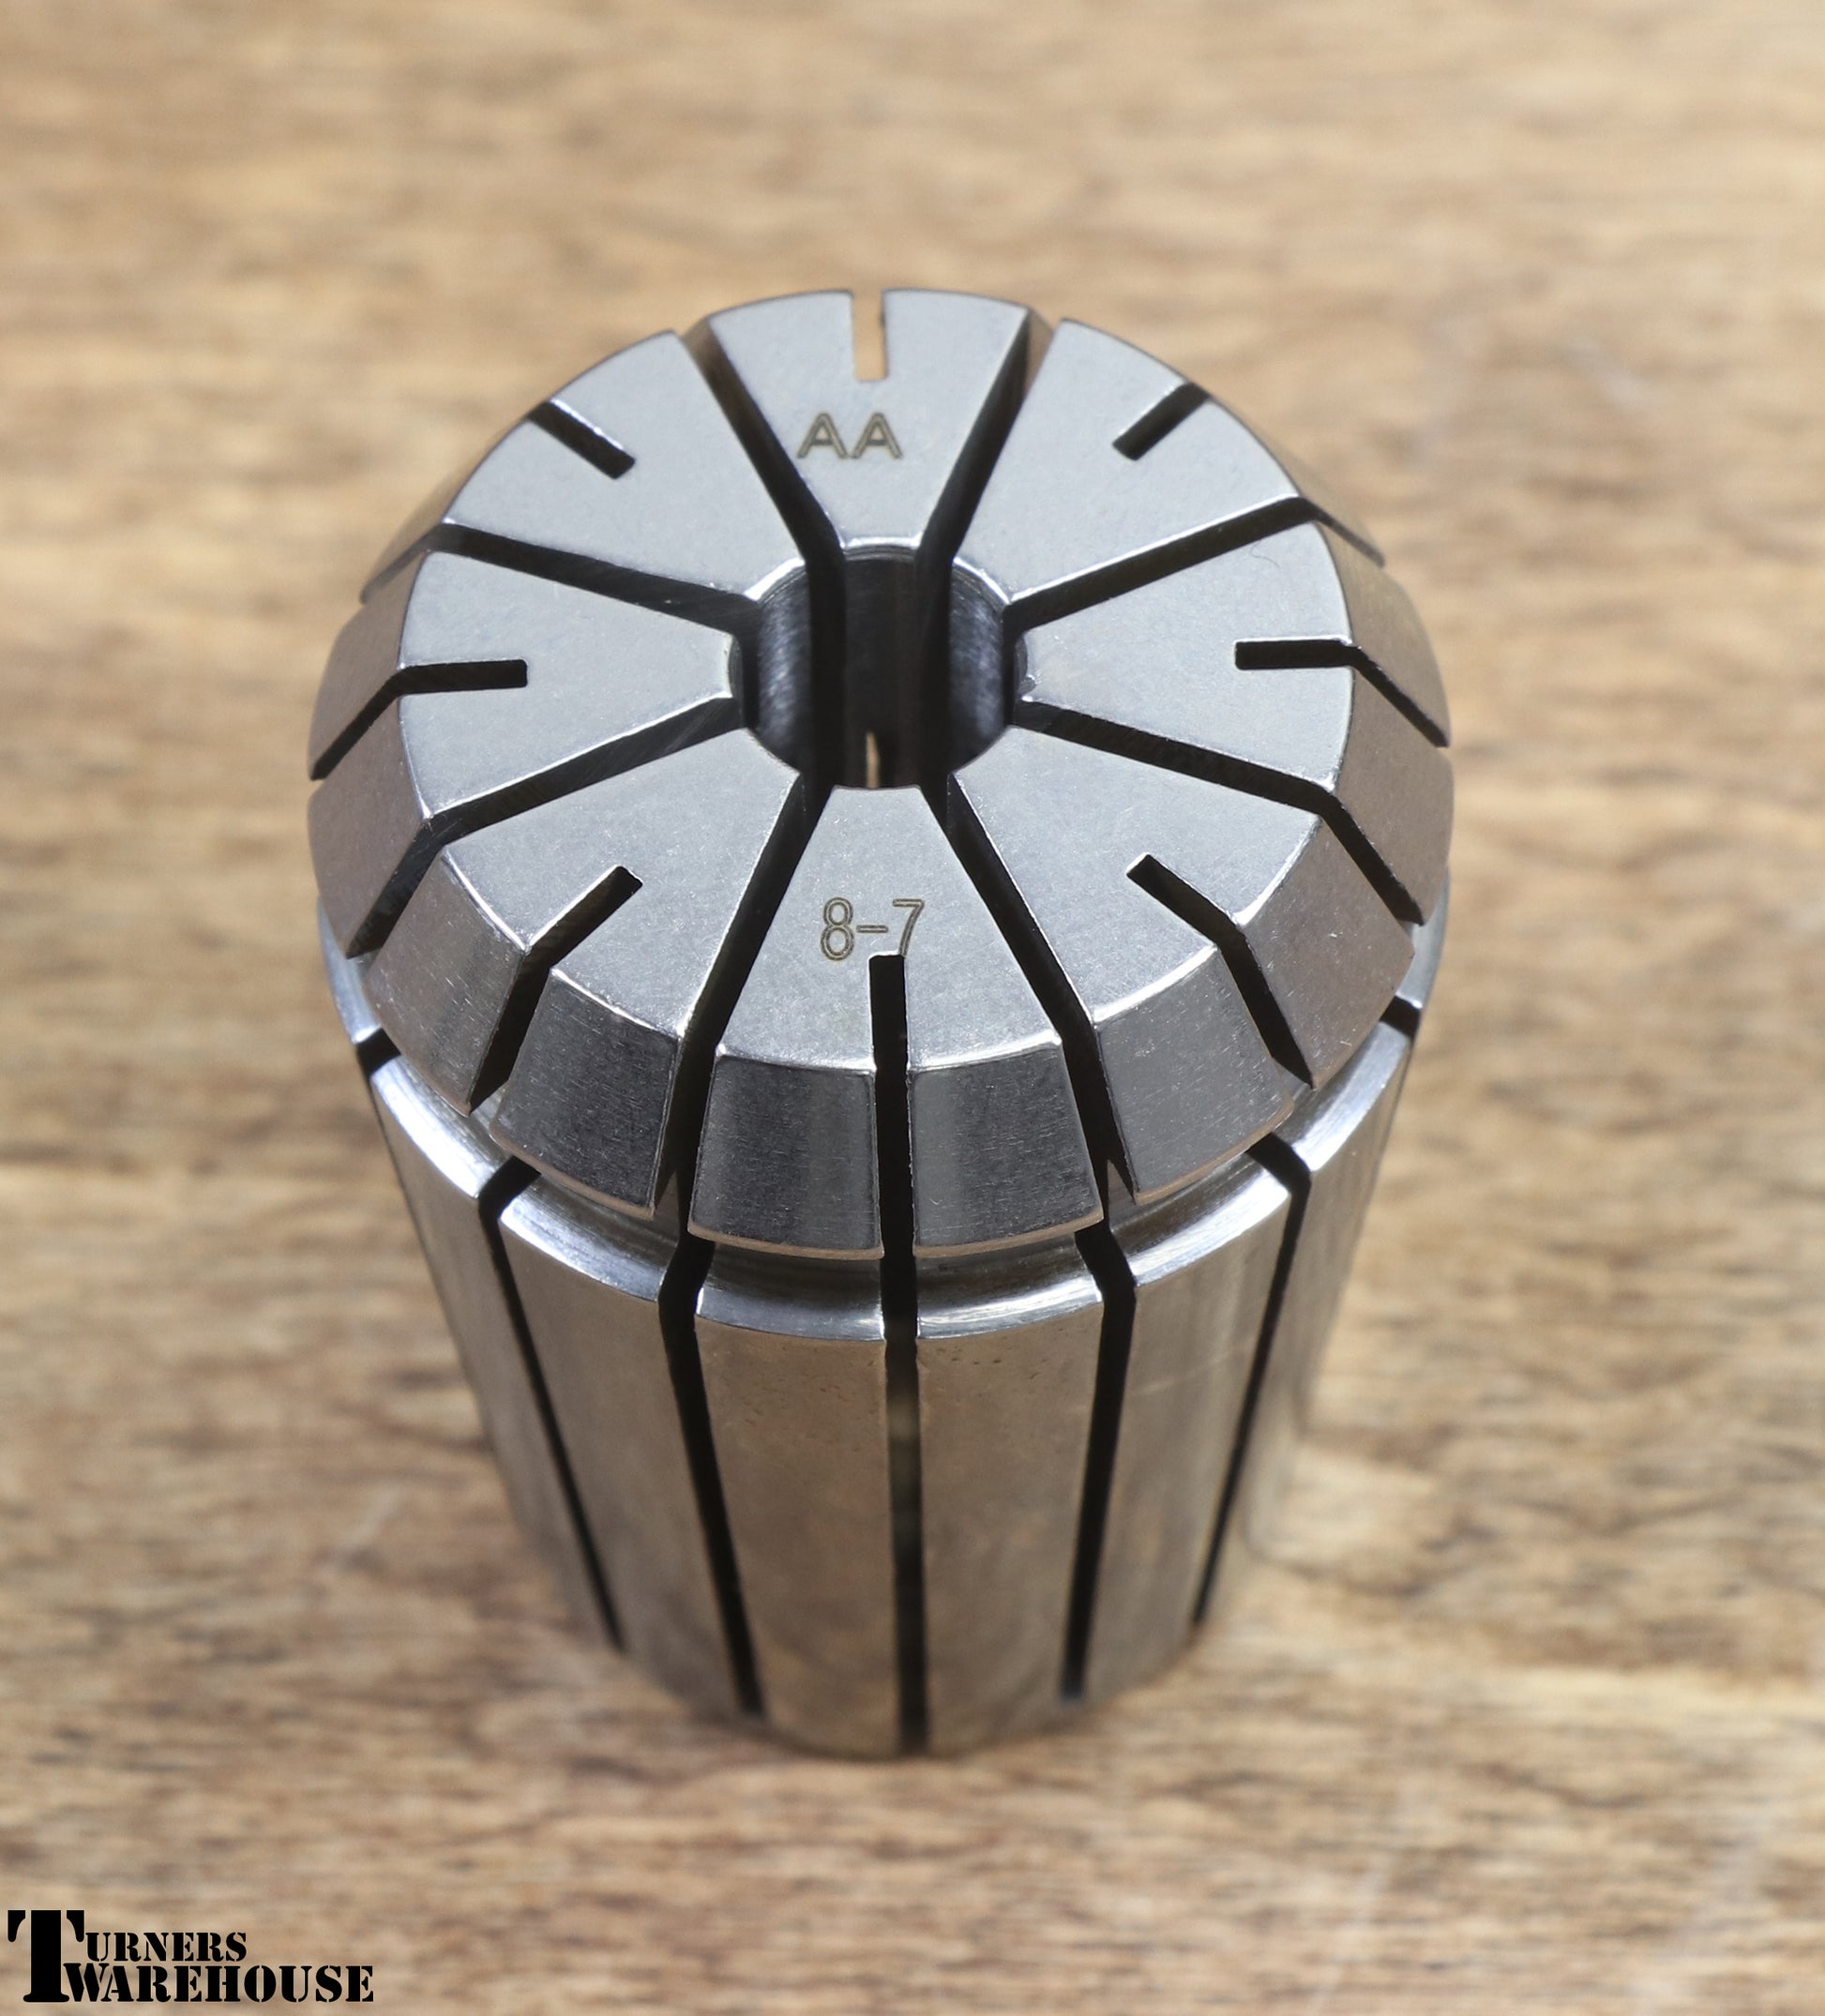 Collet Chuck 8-7mm Collet